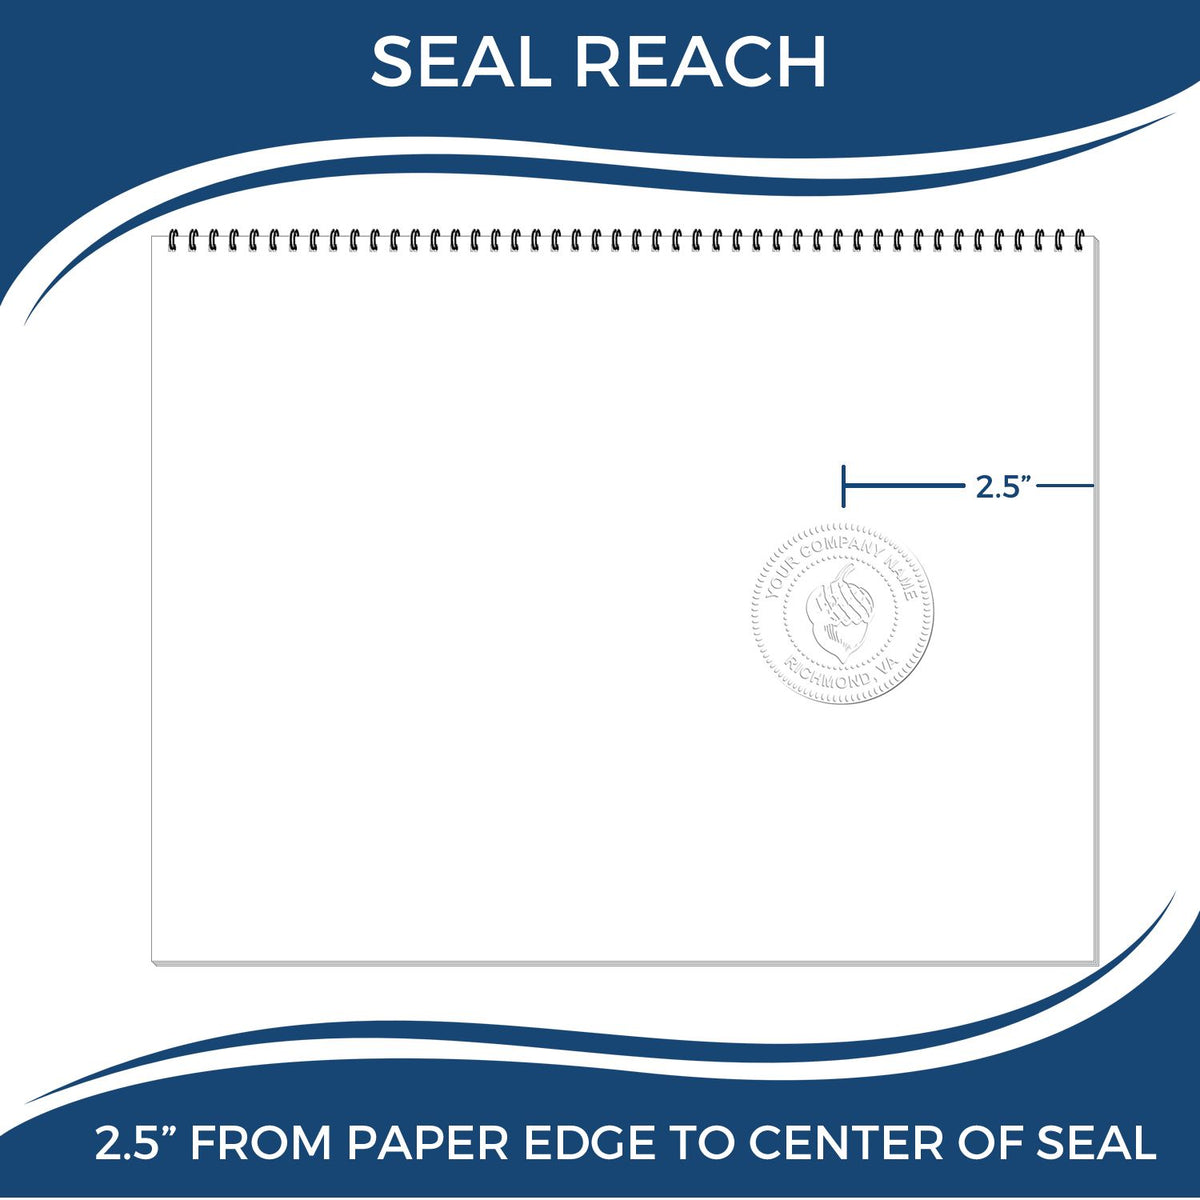 An infographic showing the seal reach which is represented by a ruler and a miniature seal image of the State of New Jersey Long Reach Architectural Embossing Seal